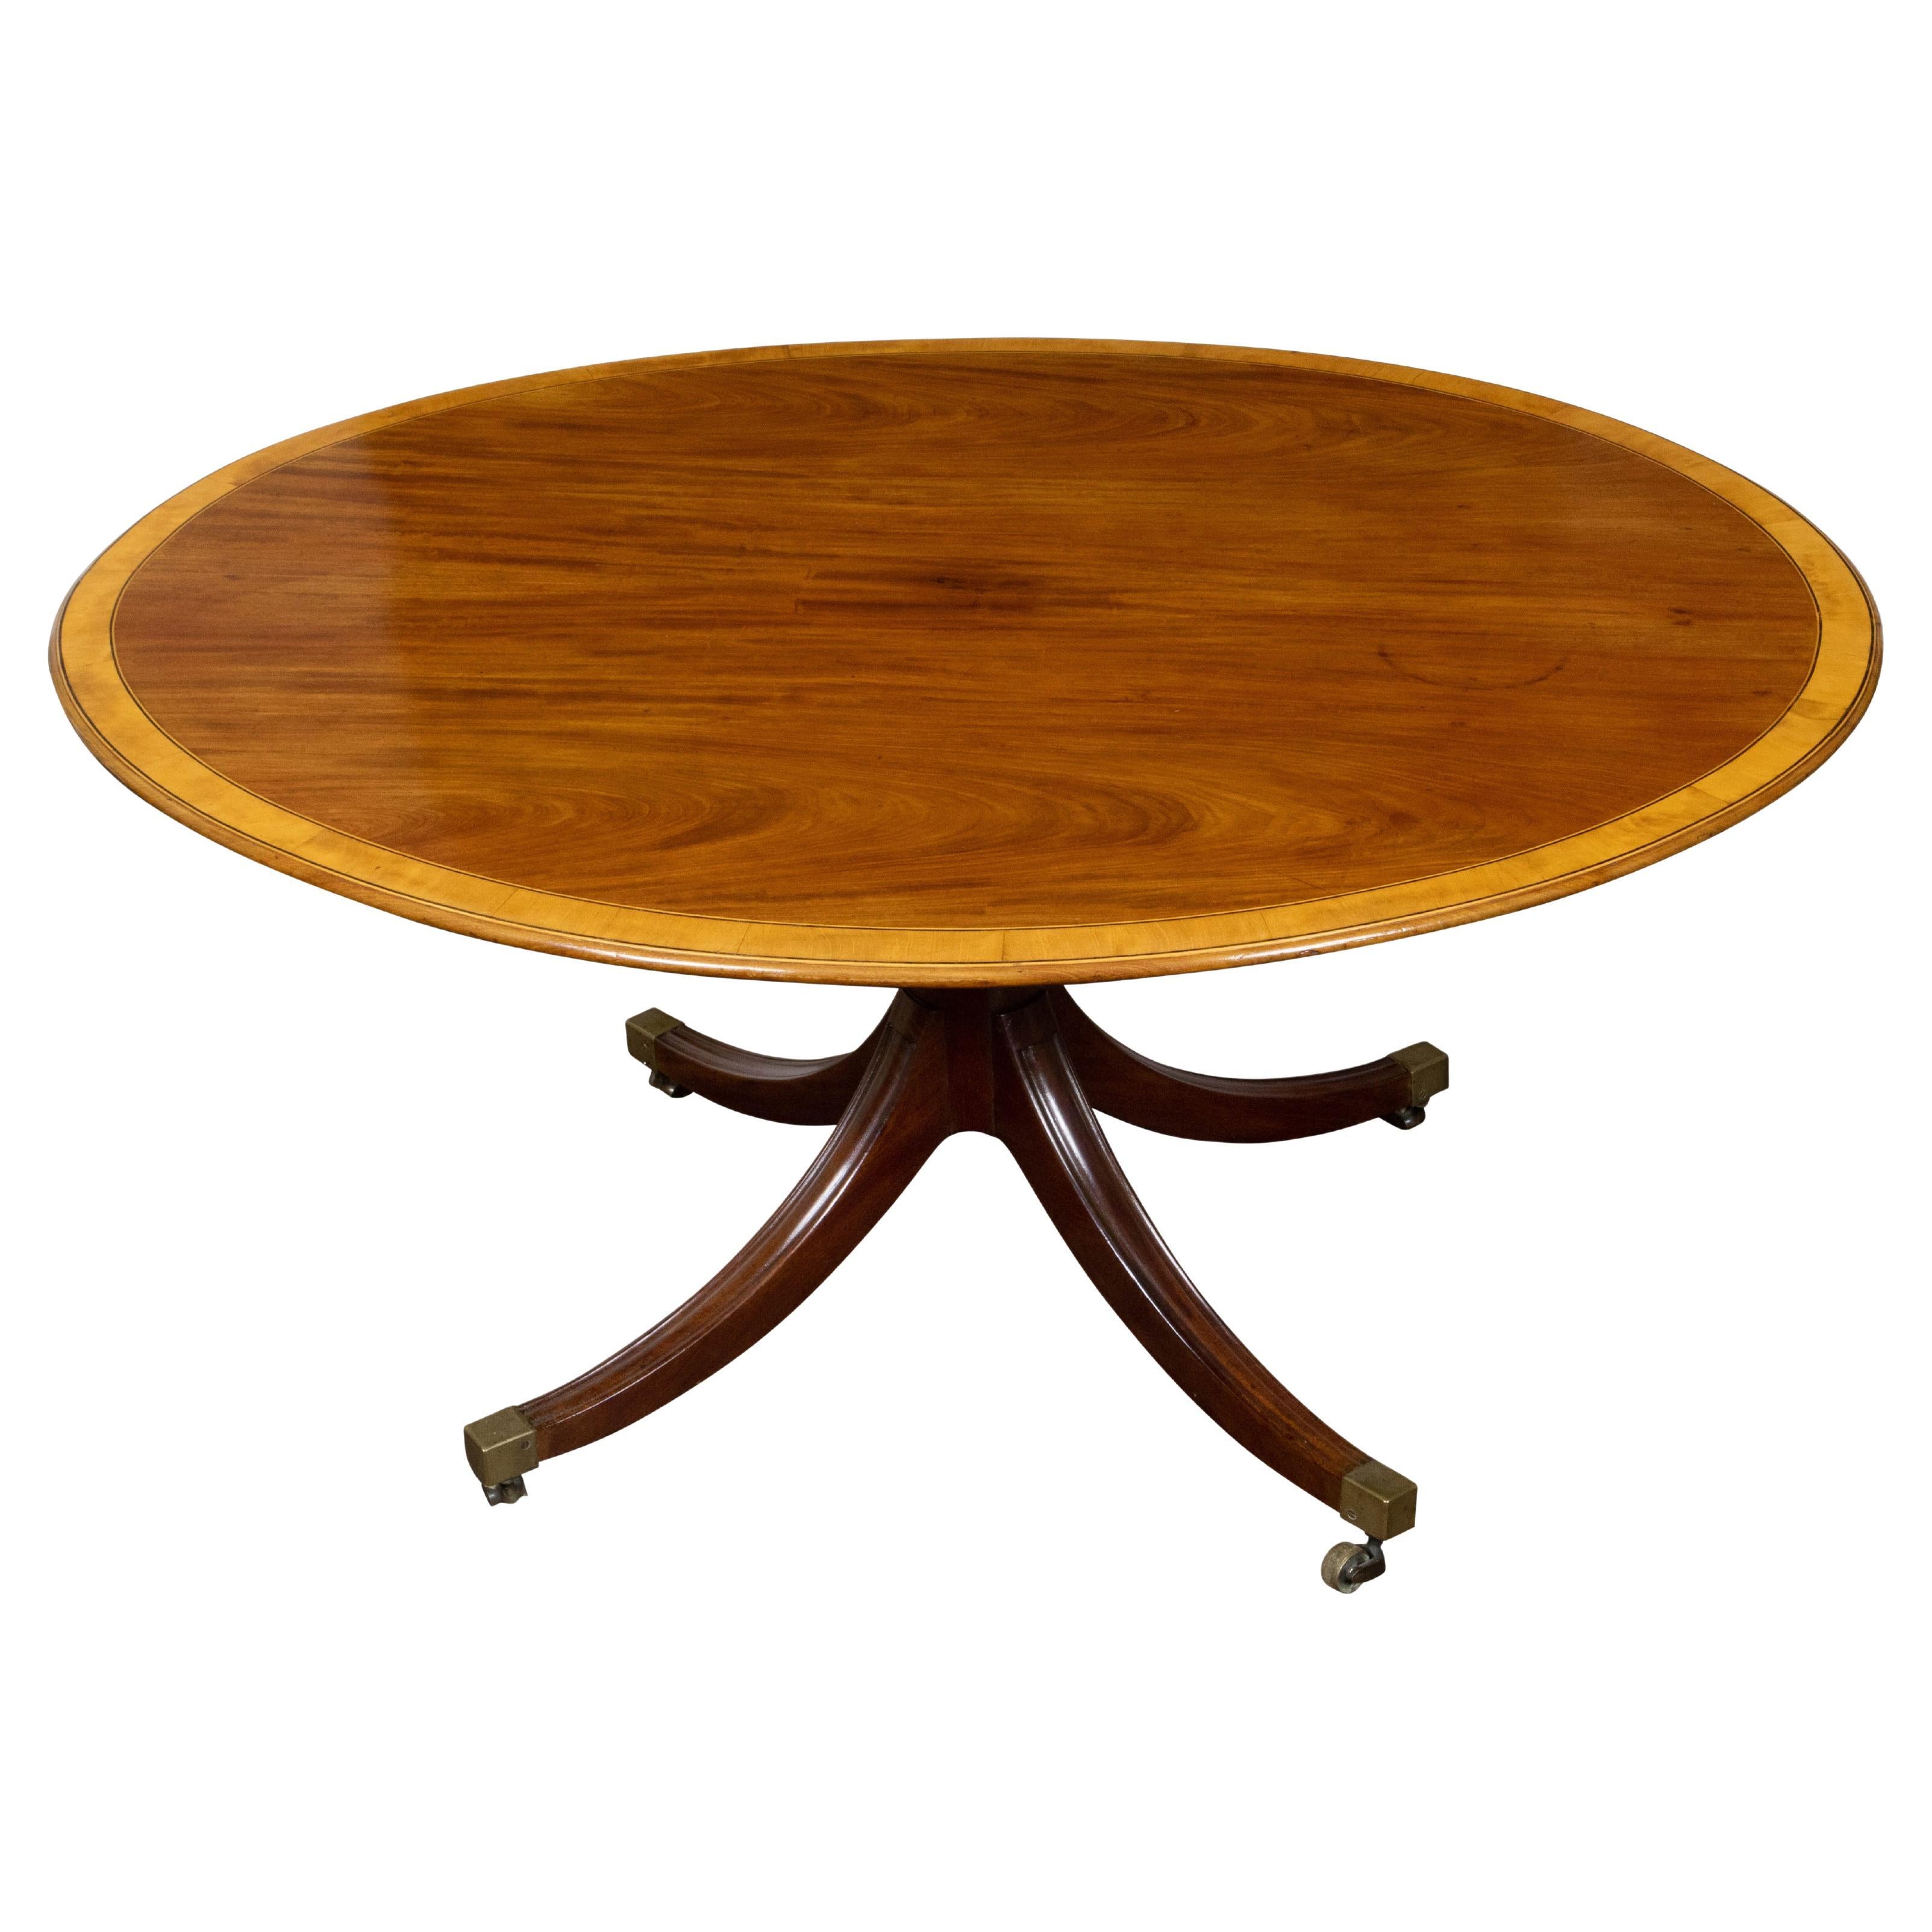 English Mahogany 1840s Oval Top Pedestal Table with Quadripod Base and Casters For Sale